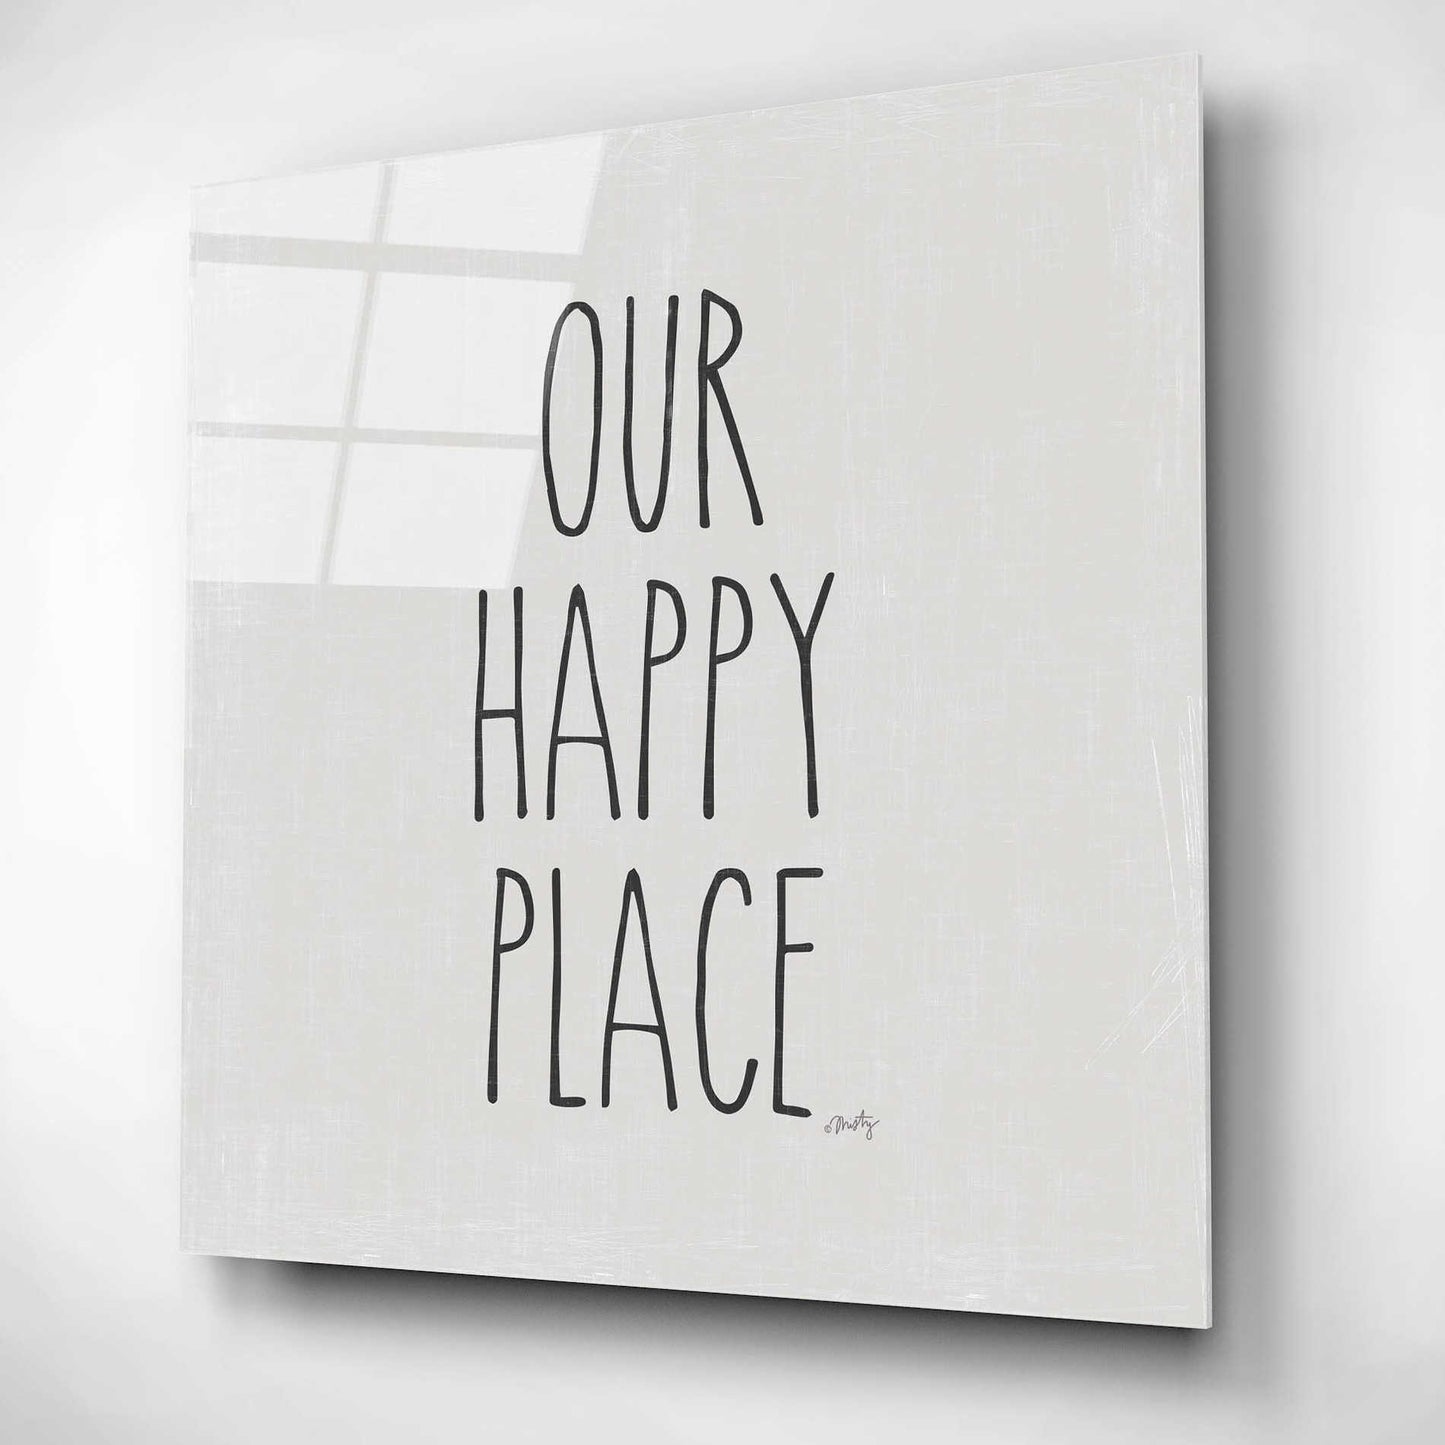 Epic Art 'Our Happy Place' by Misty Michelle, Acrylic Glass Wall Art,12x12